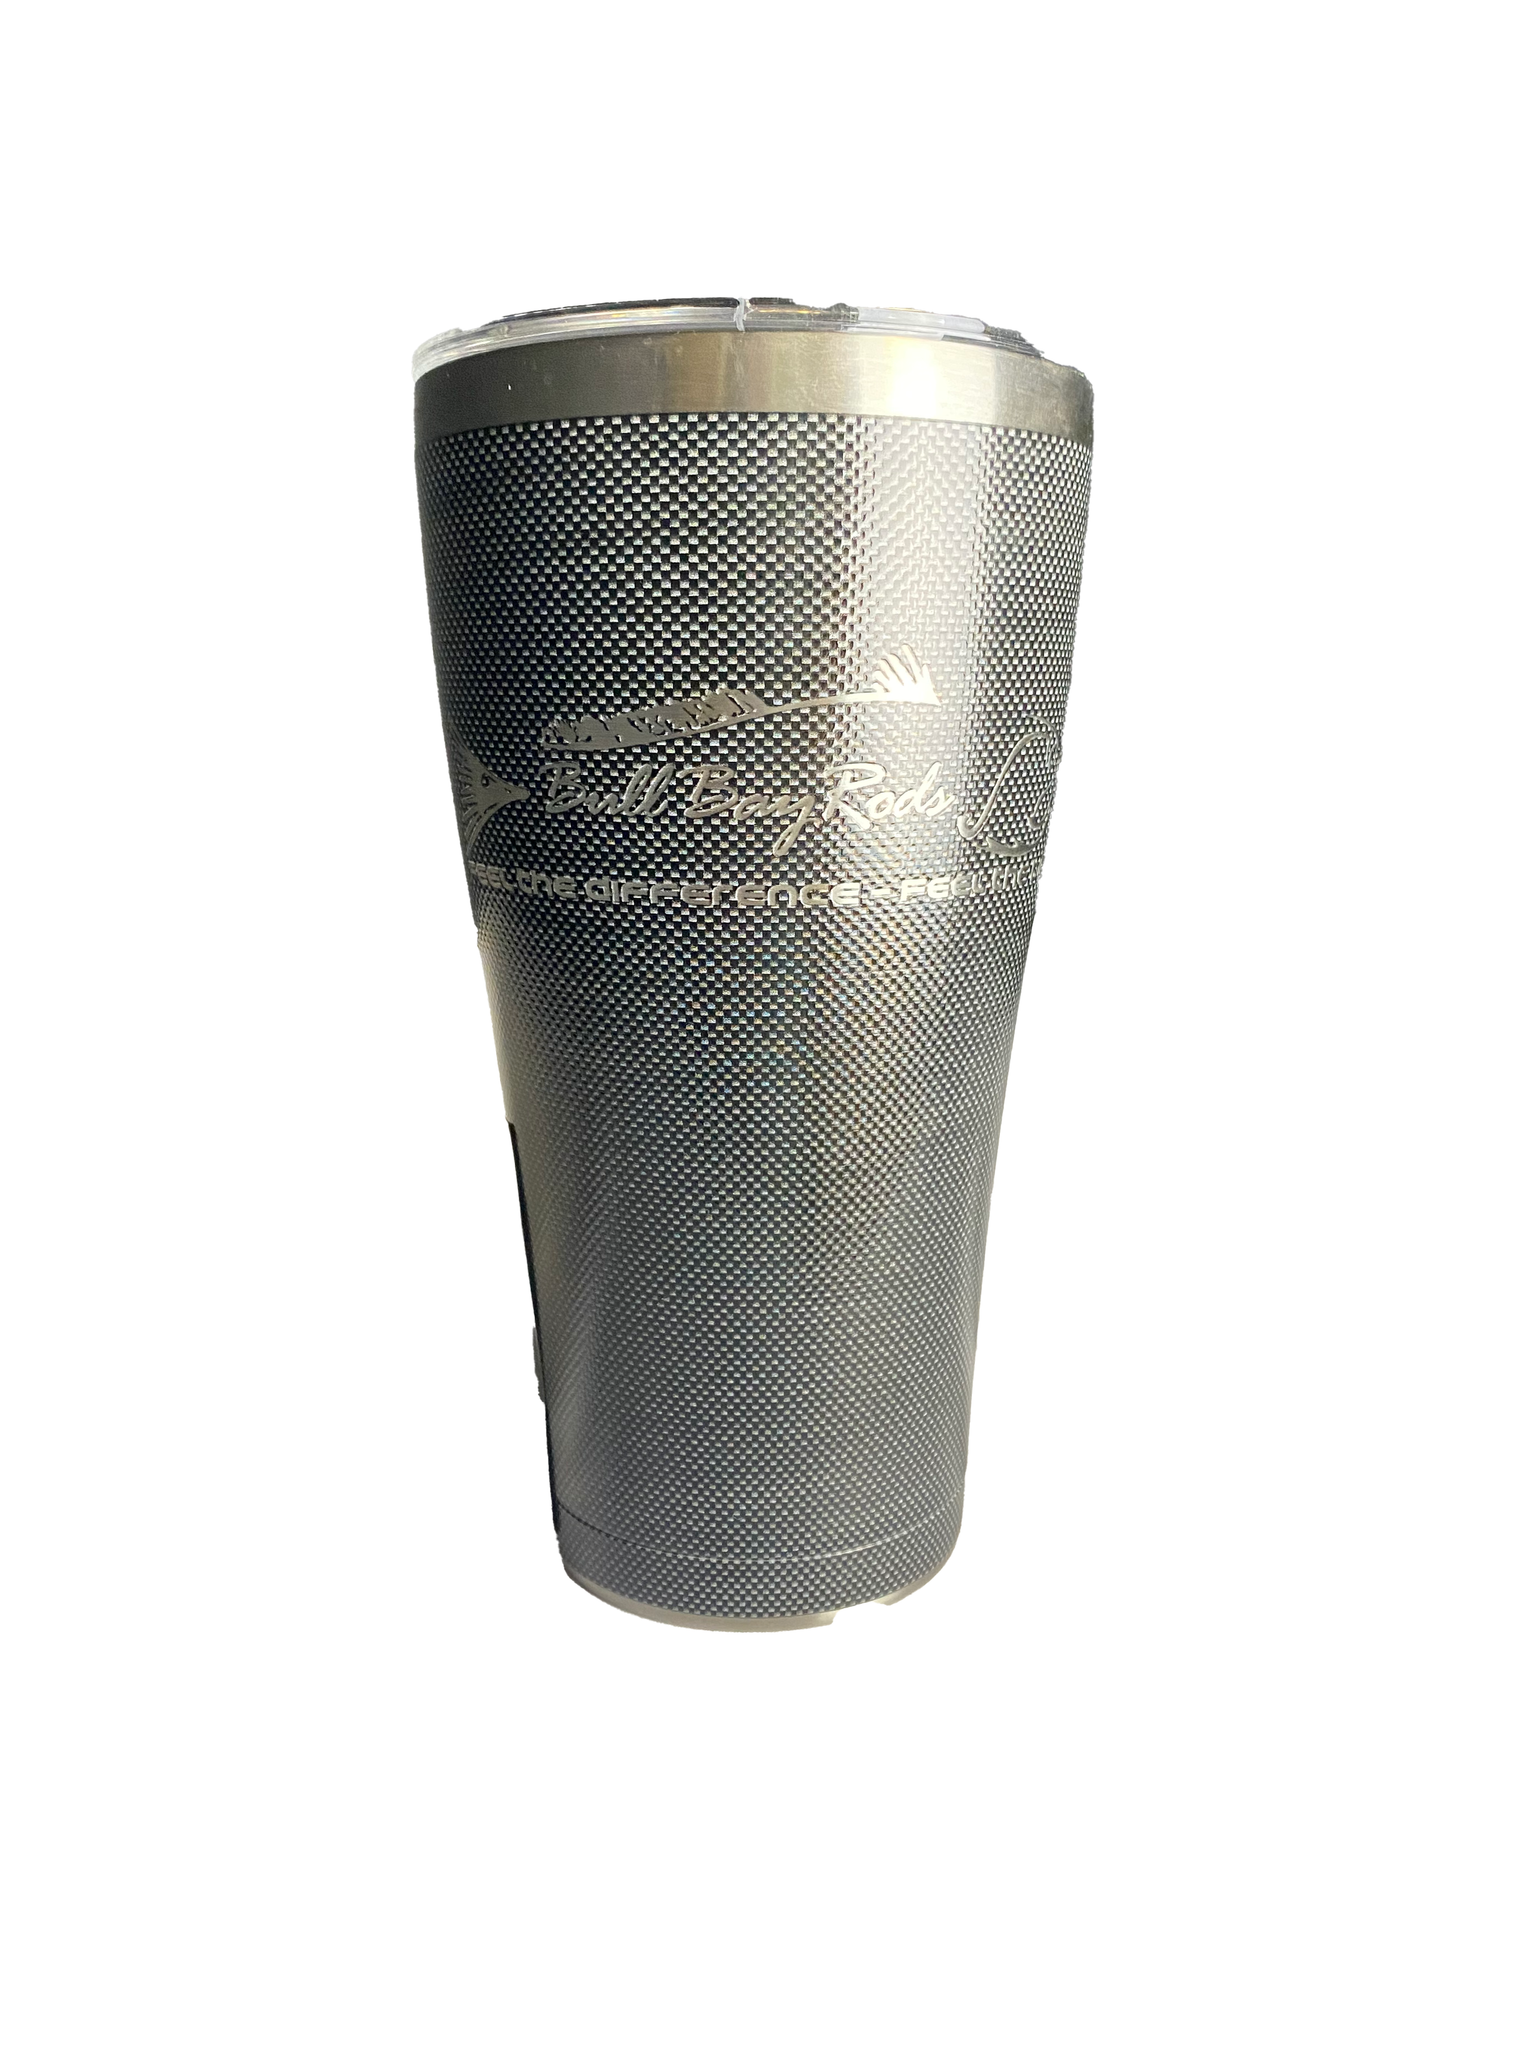 Tervis by Bull Bay - Stainless Steel Tumbler